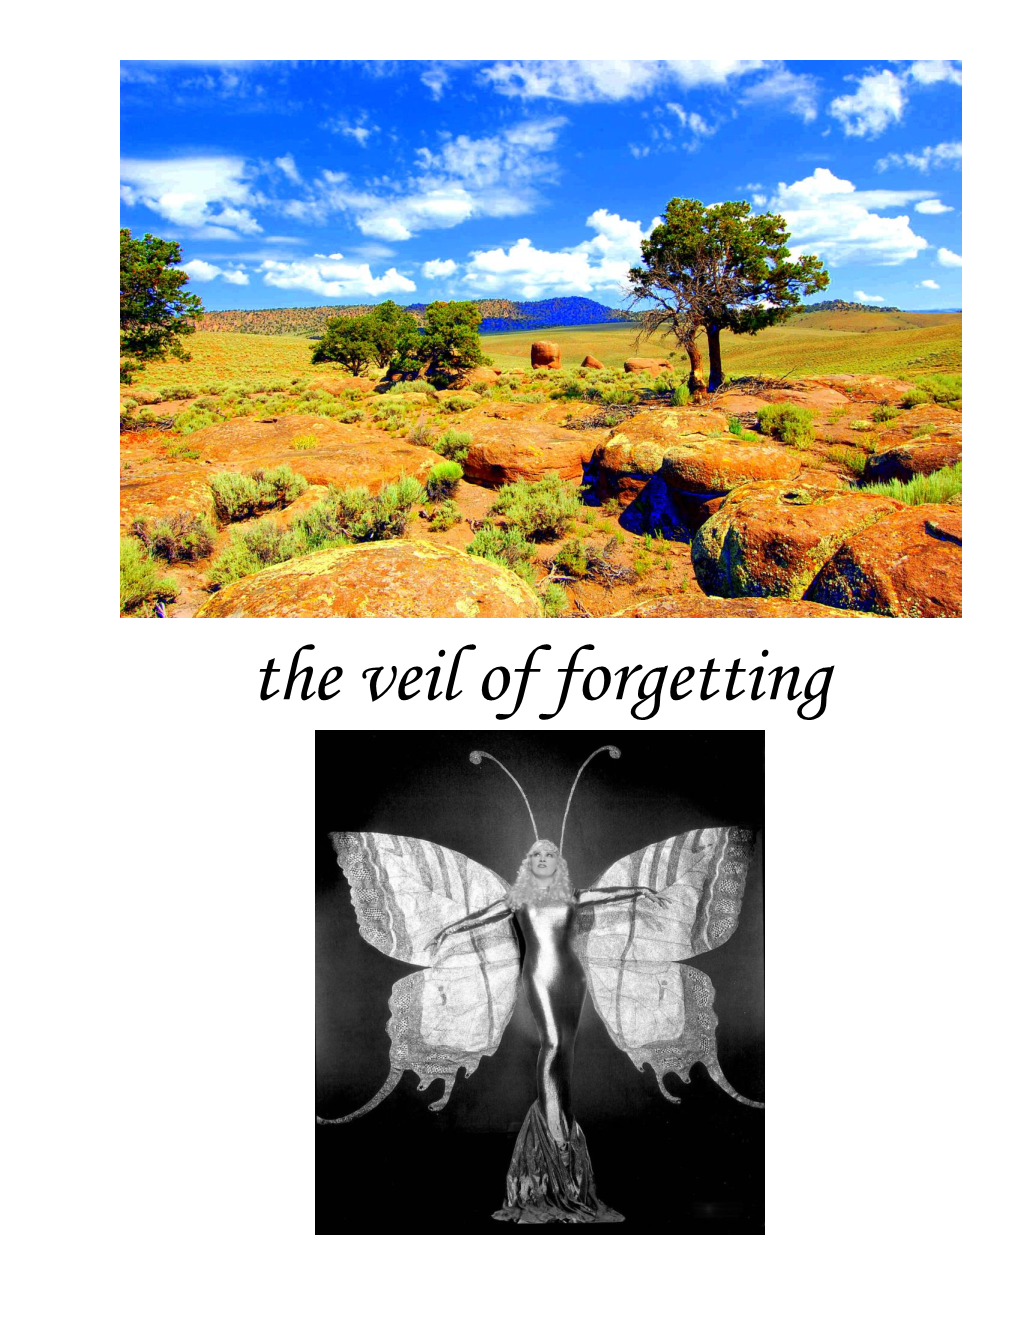 The Veil of Forgetting